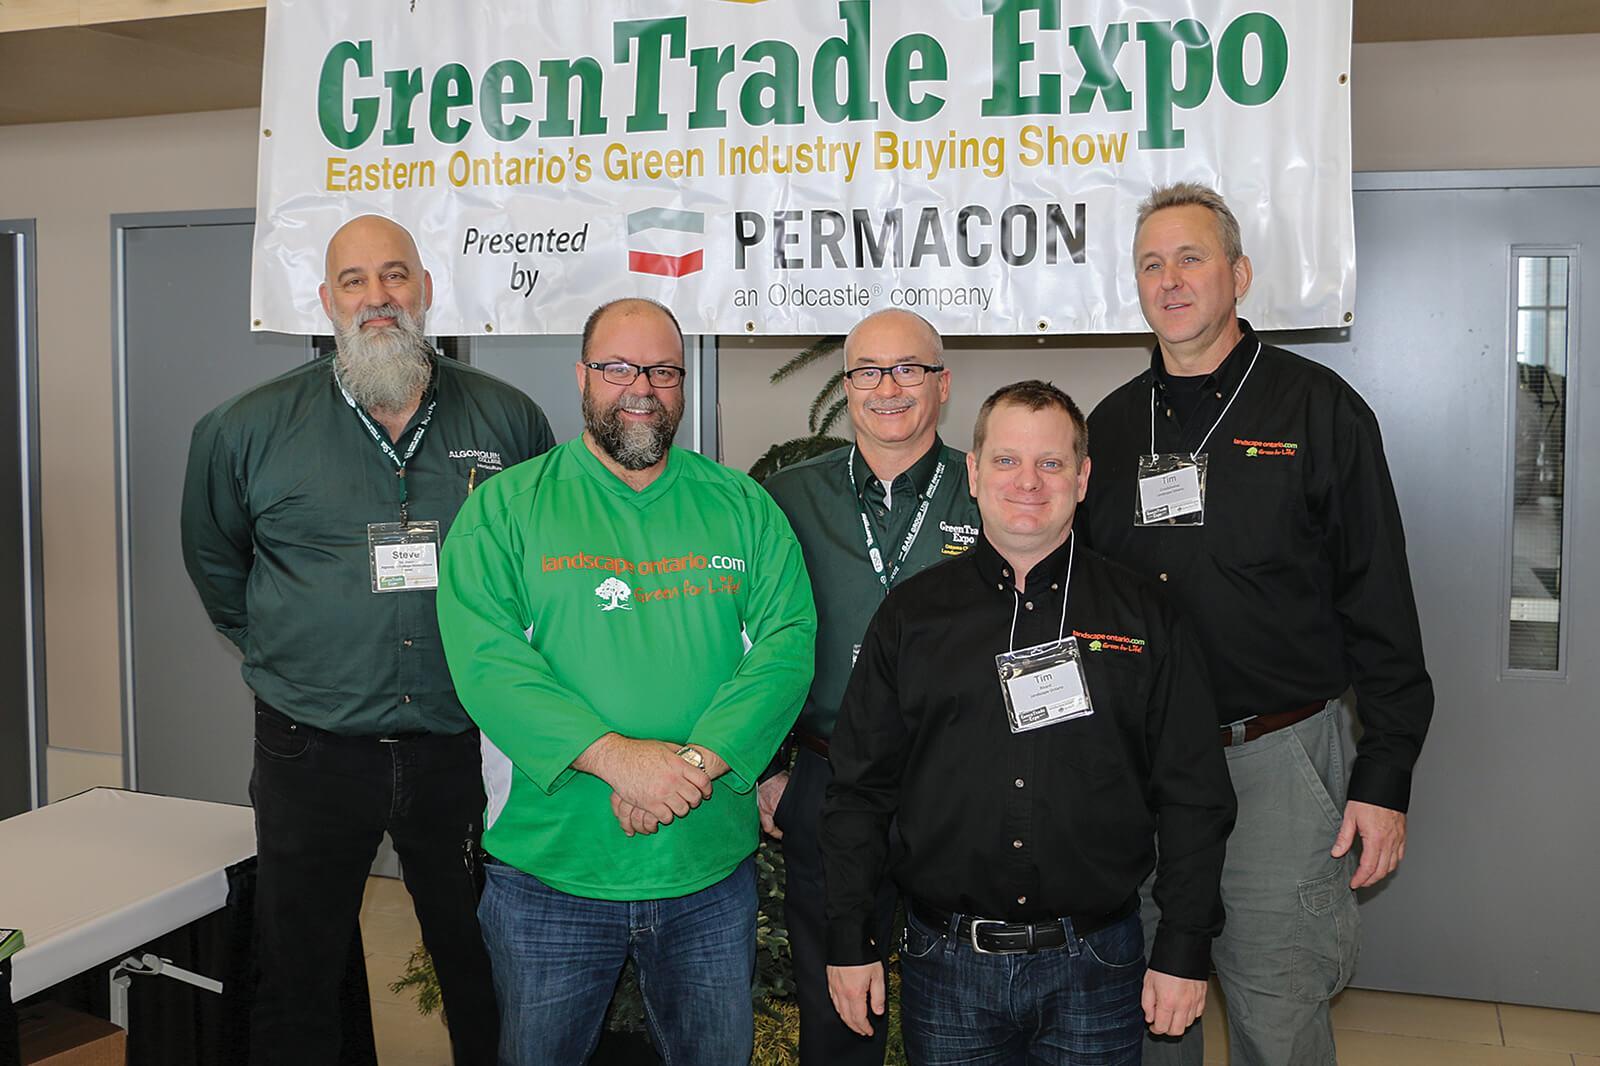 Two Chapters meet at GreenTrade Expo